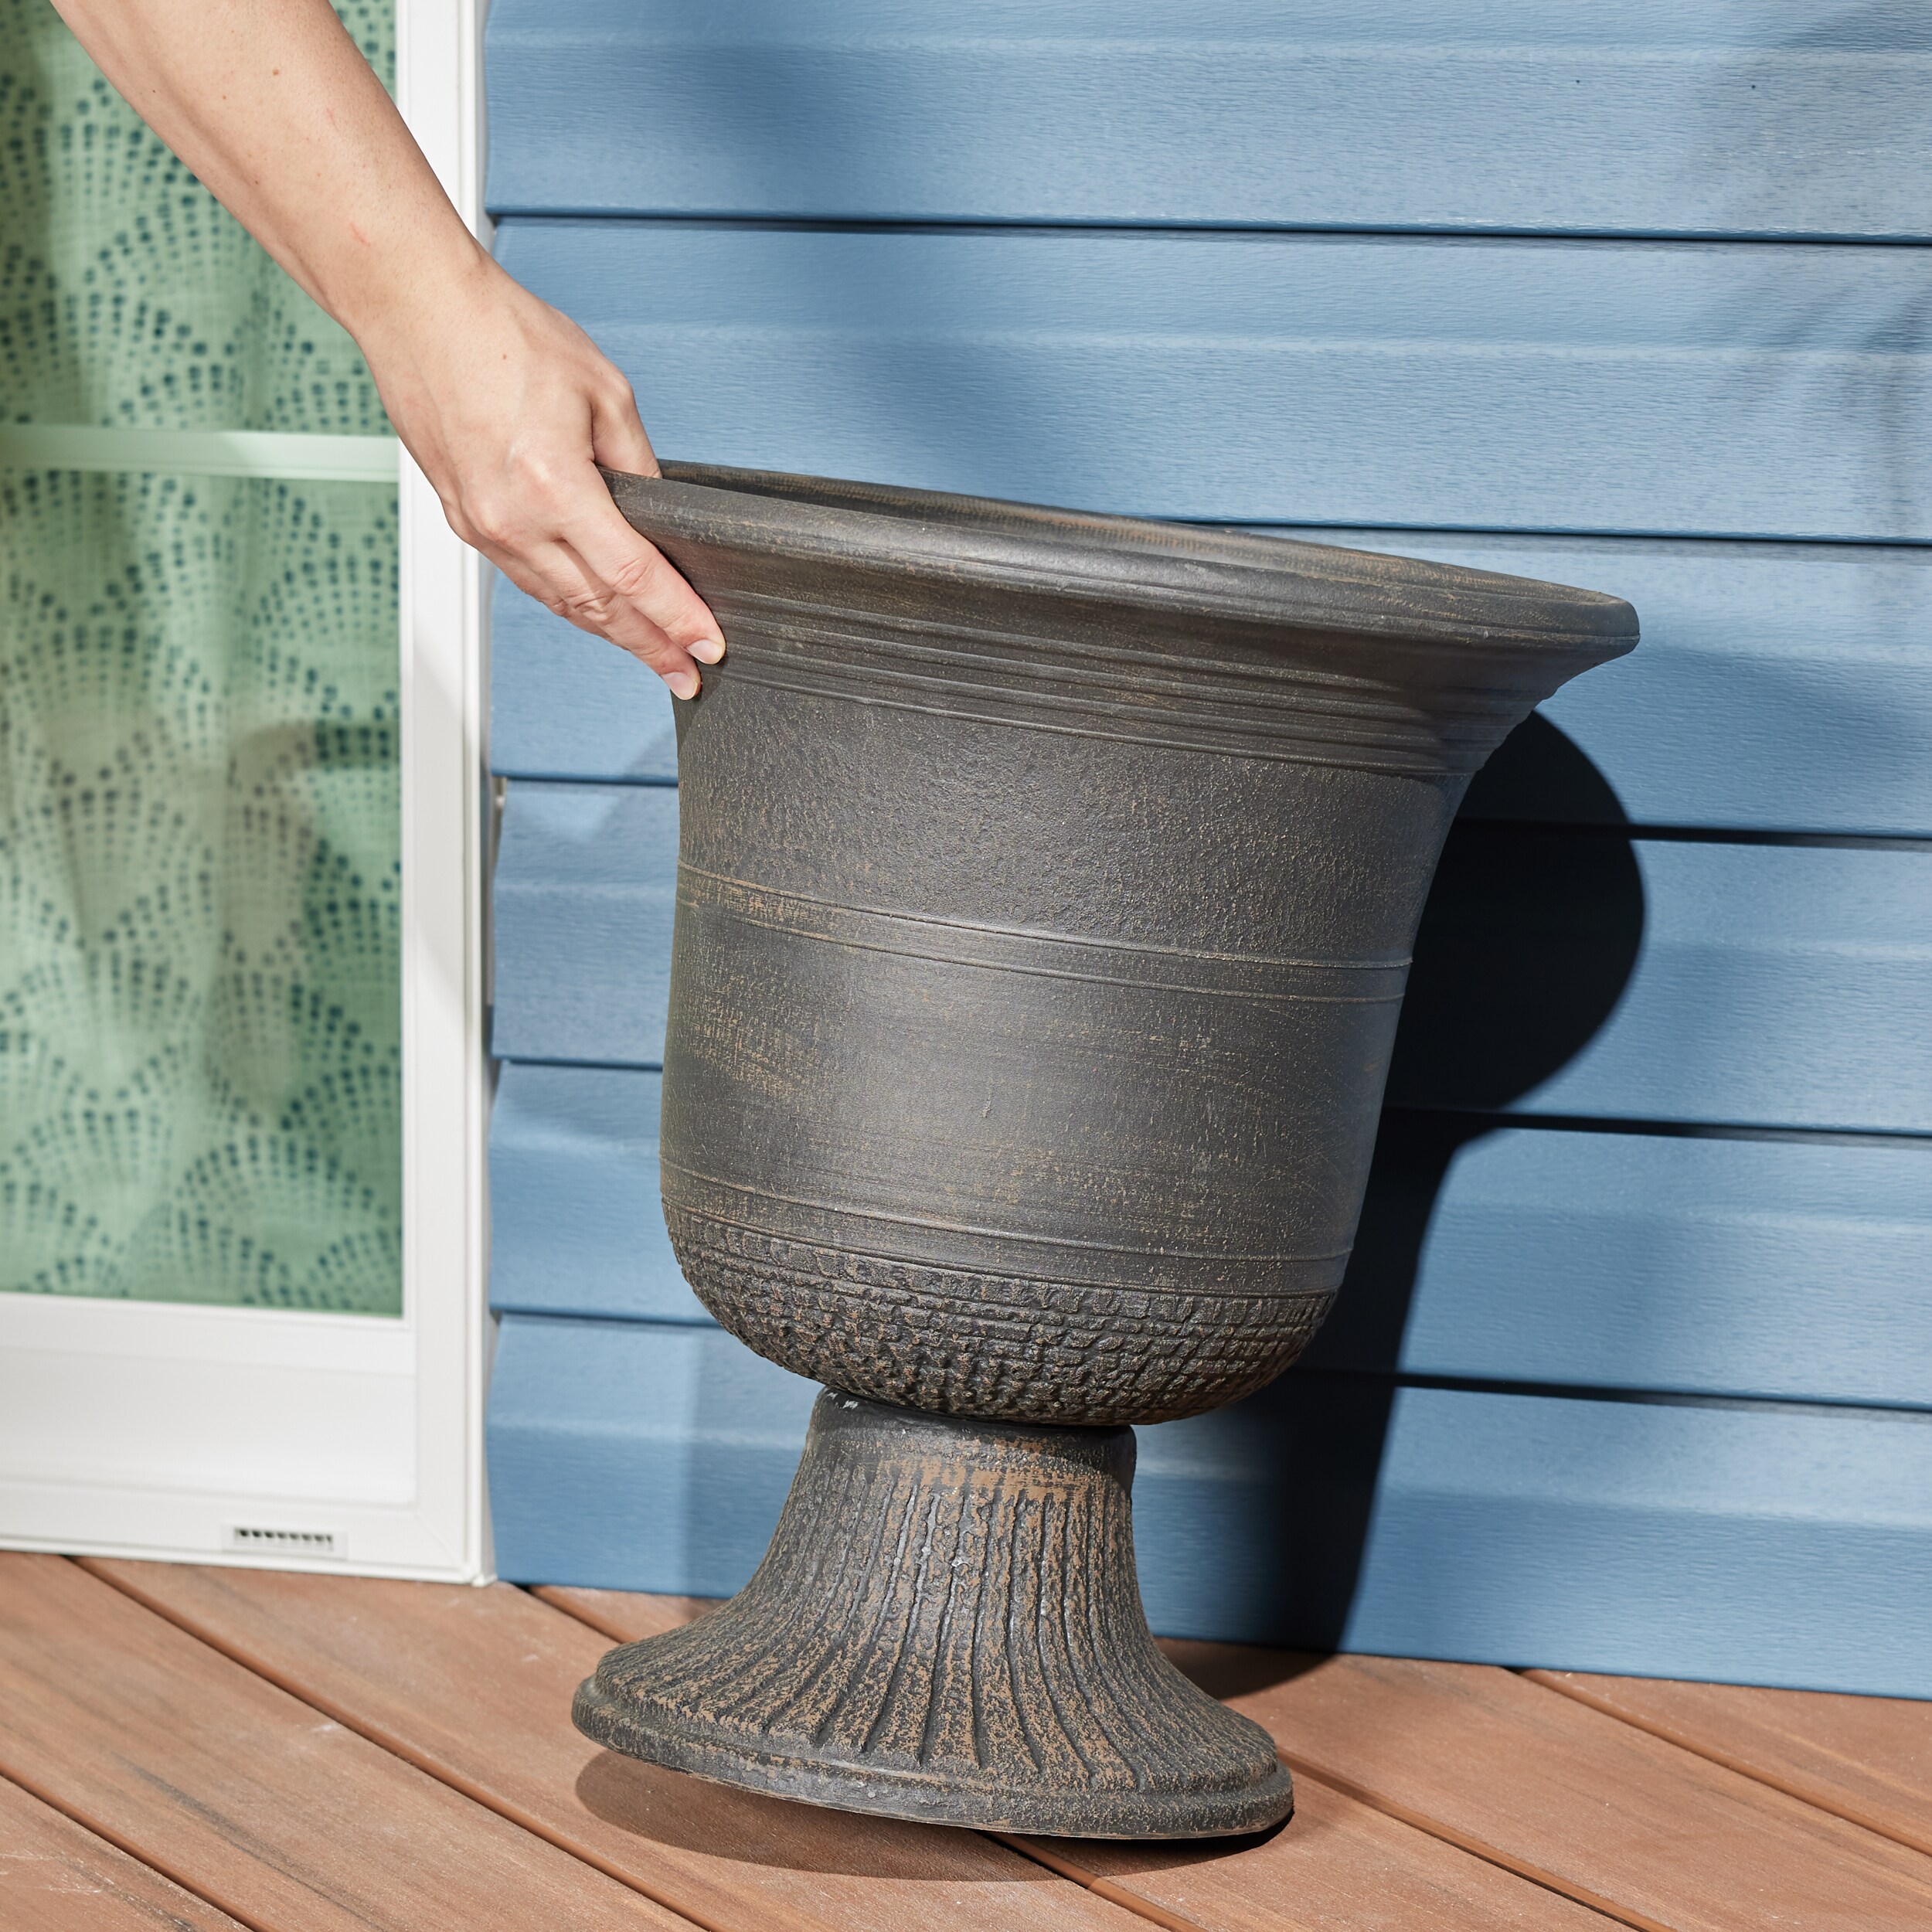 Clay Gray Pots & Planters at Lowes.com